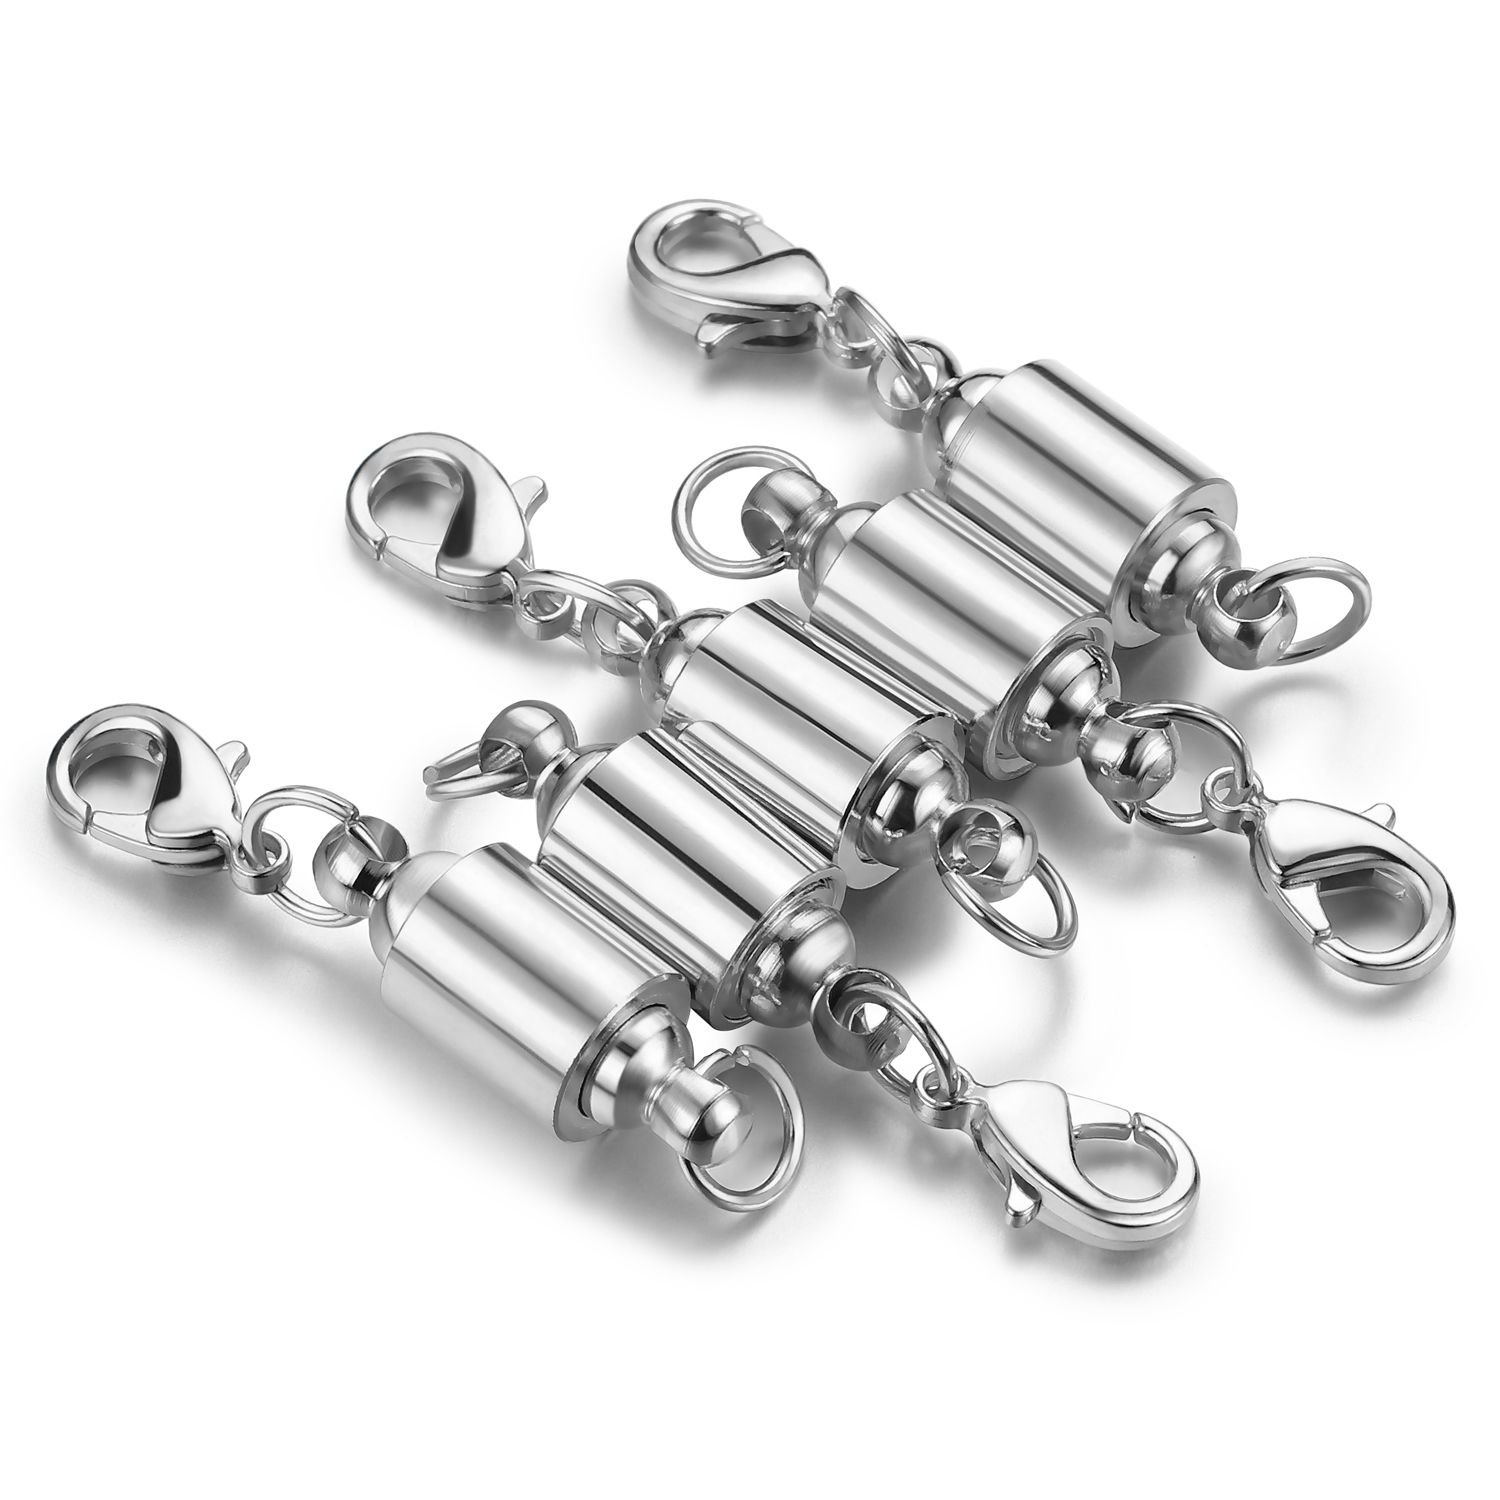 5pcs Stainless Steel Lobster Clasp With Single Jump Ring Mixed Color Diy  Jewelry Making Supplies, For Bracelet & Necklace